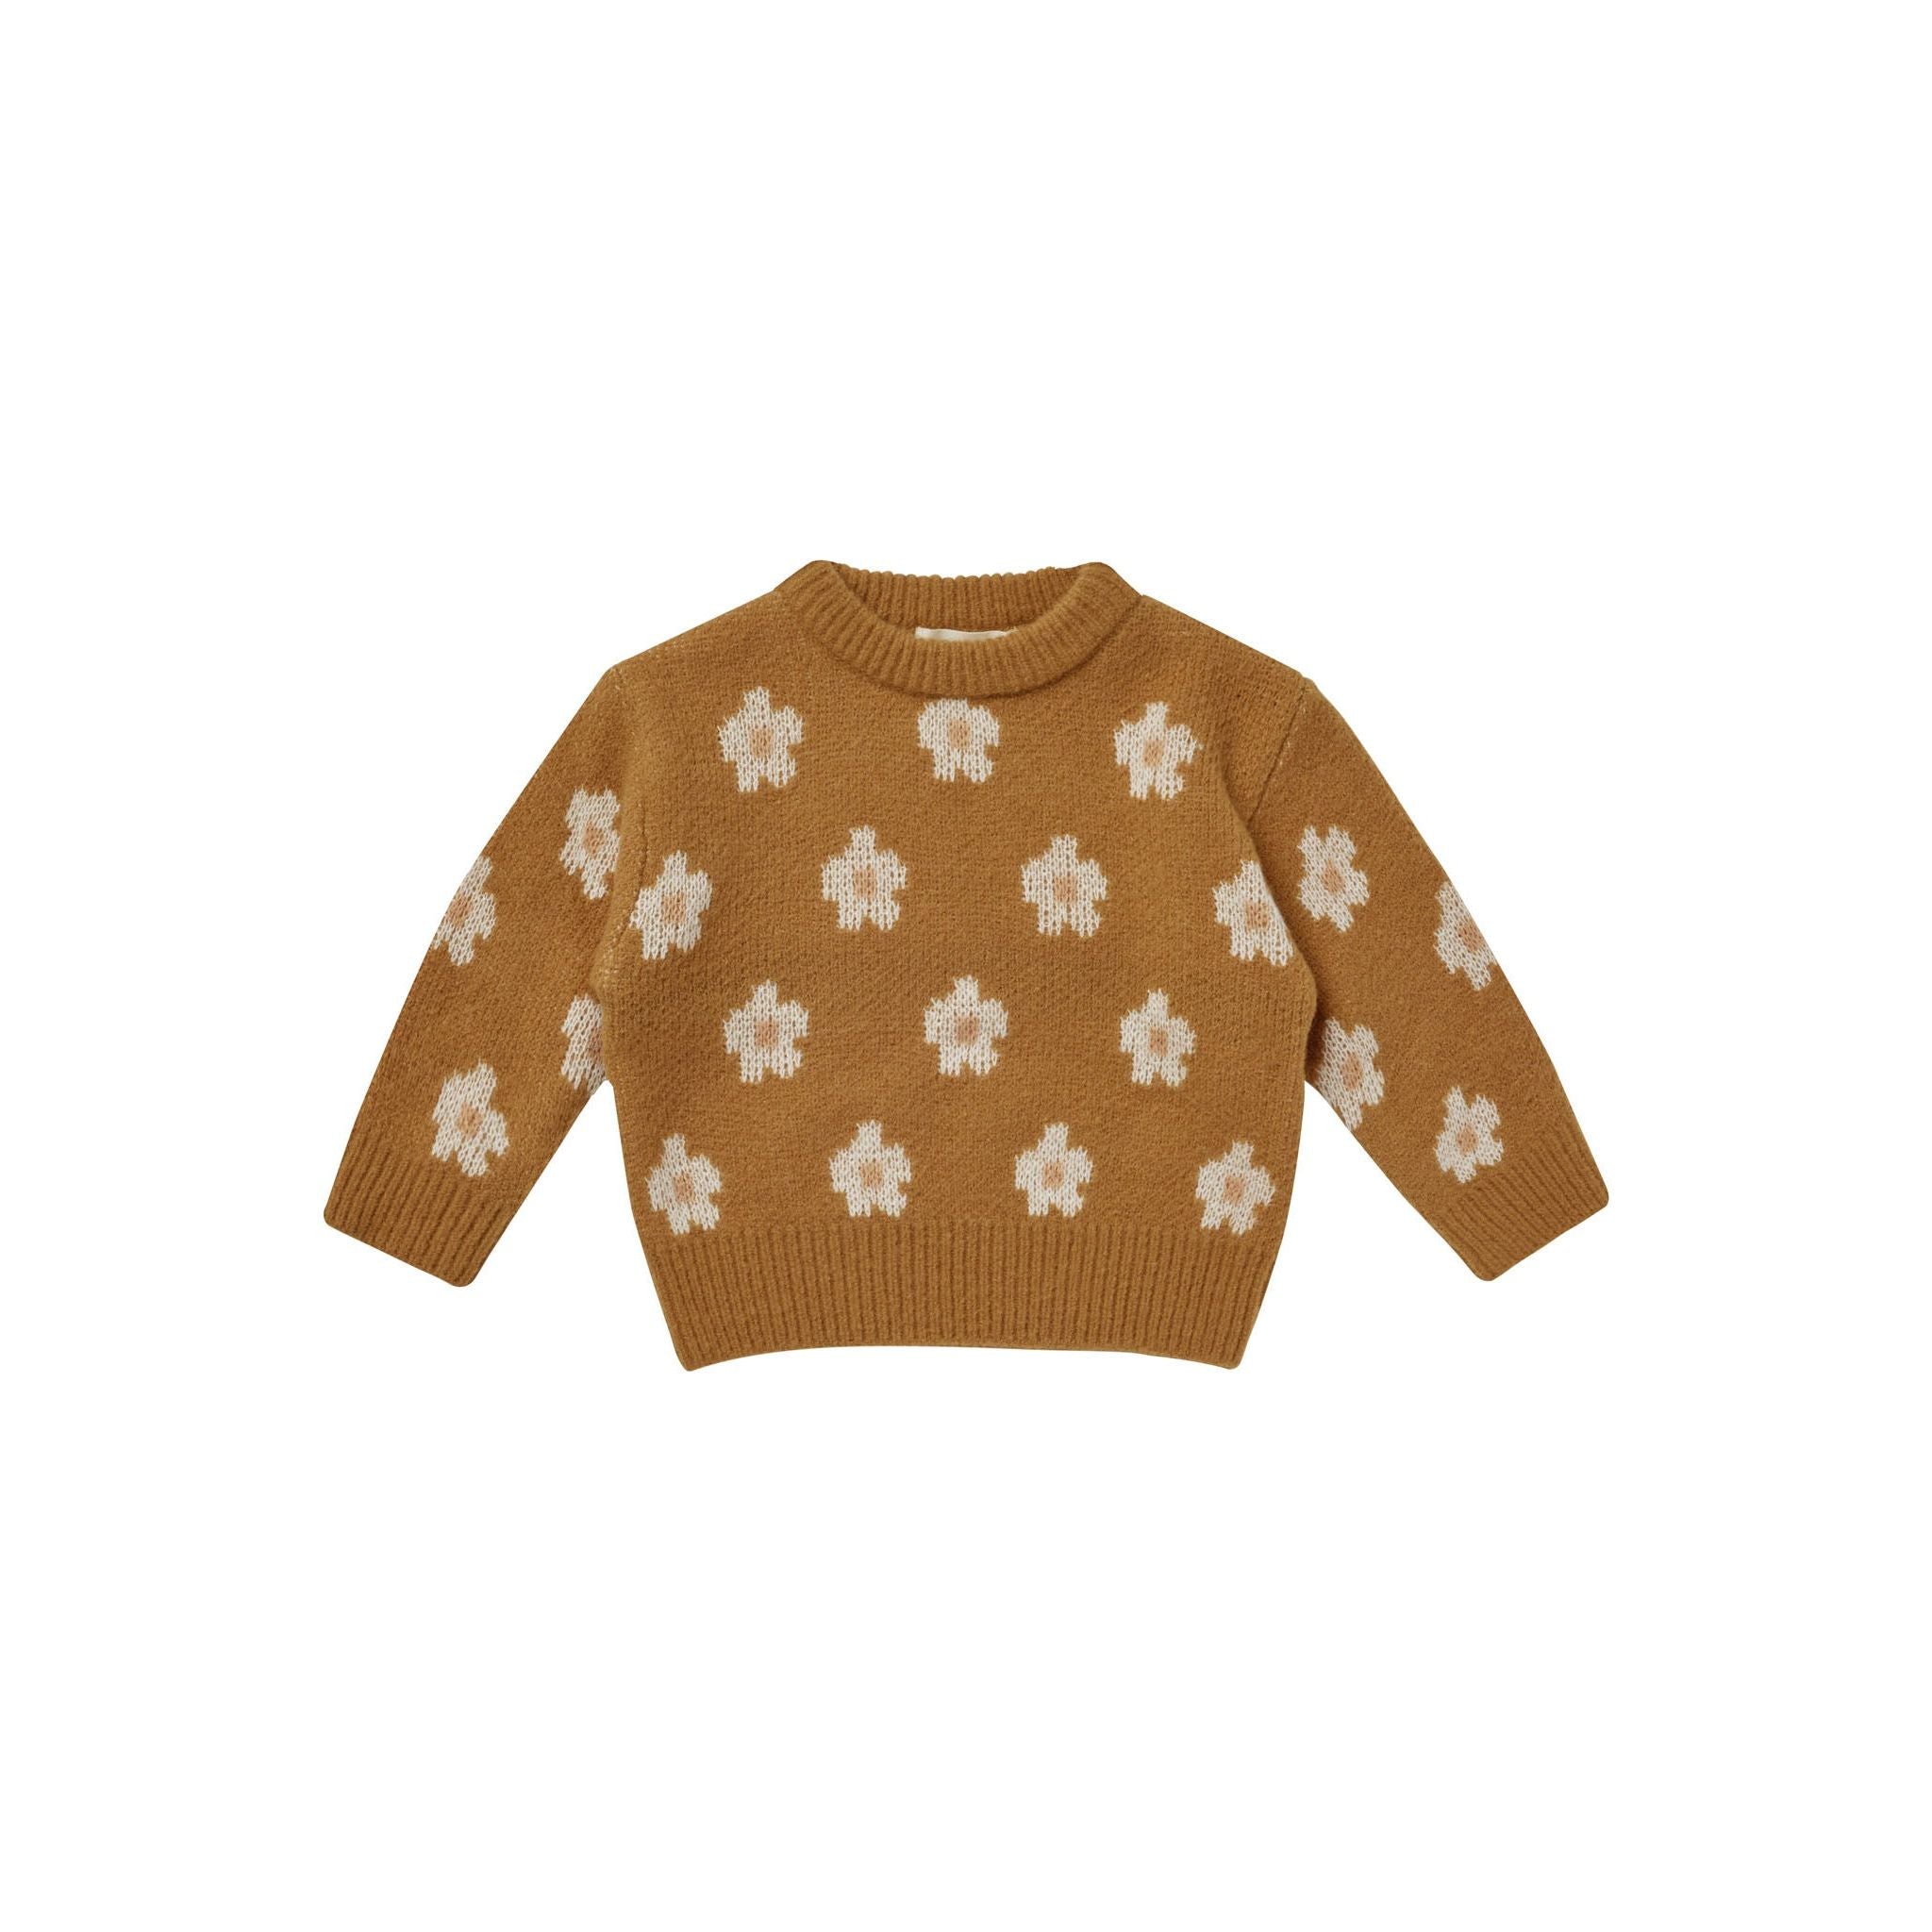 brass colored crew neck sweater with daisies